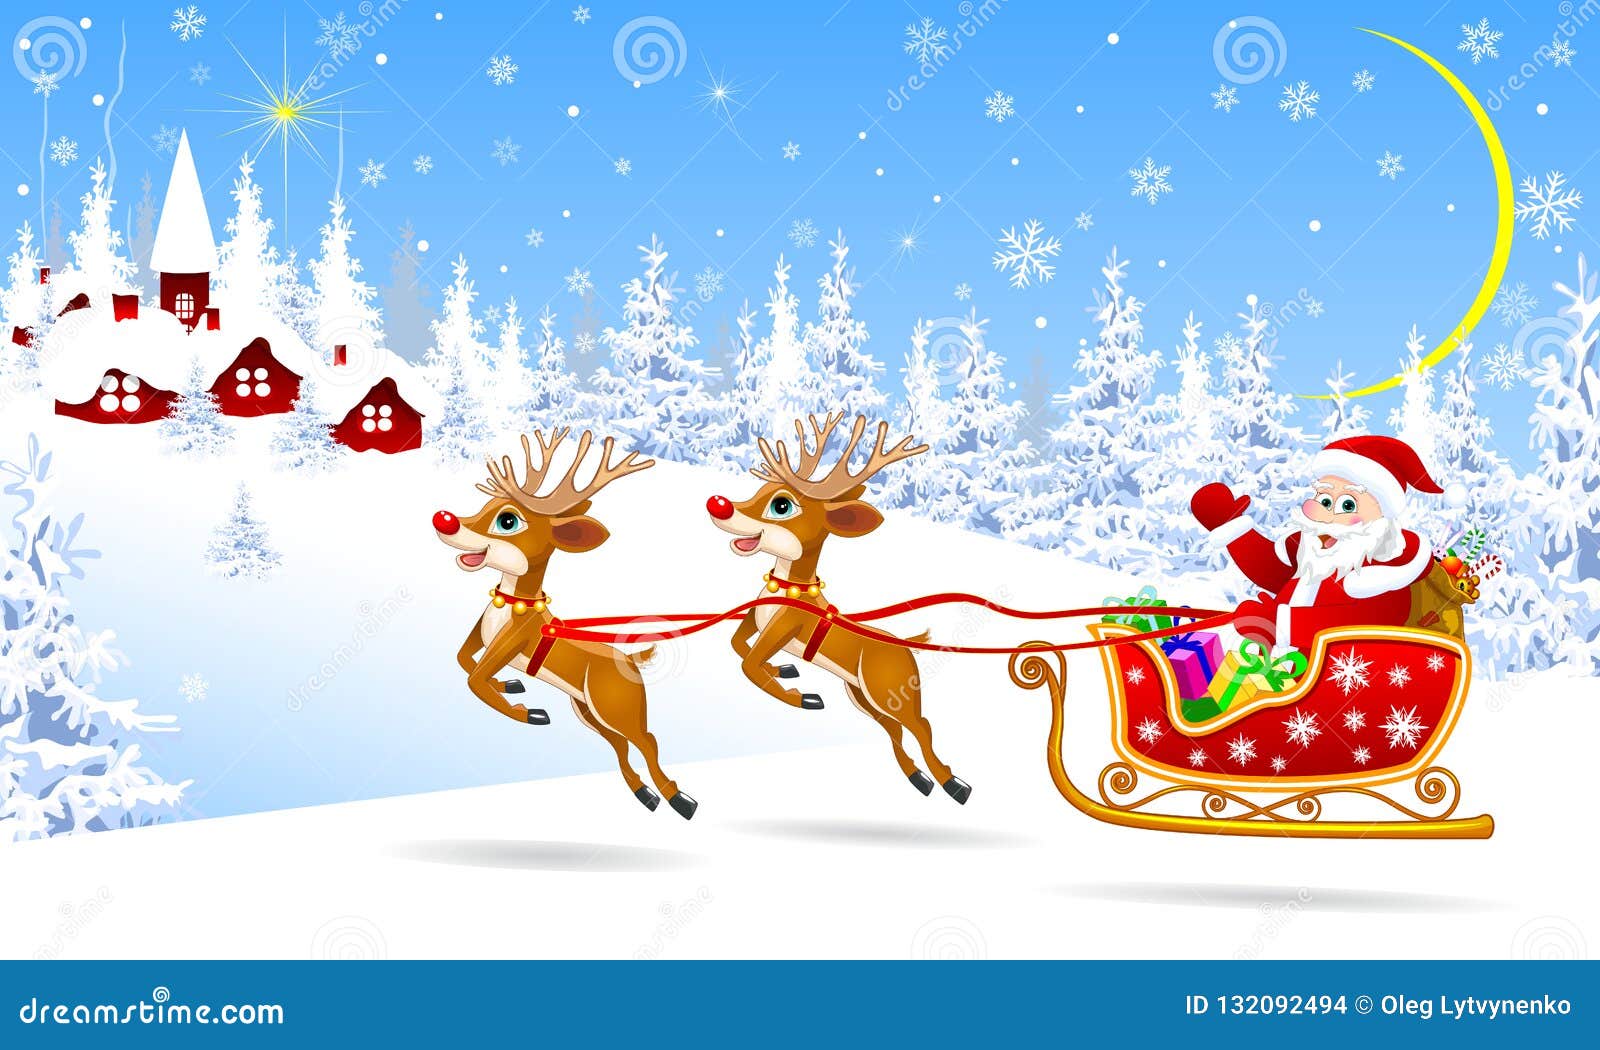 Santa On A Sleigh With Deers Welcomes Stock Vector - Illustration of ...